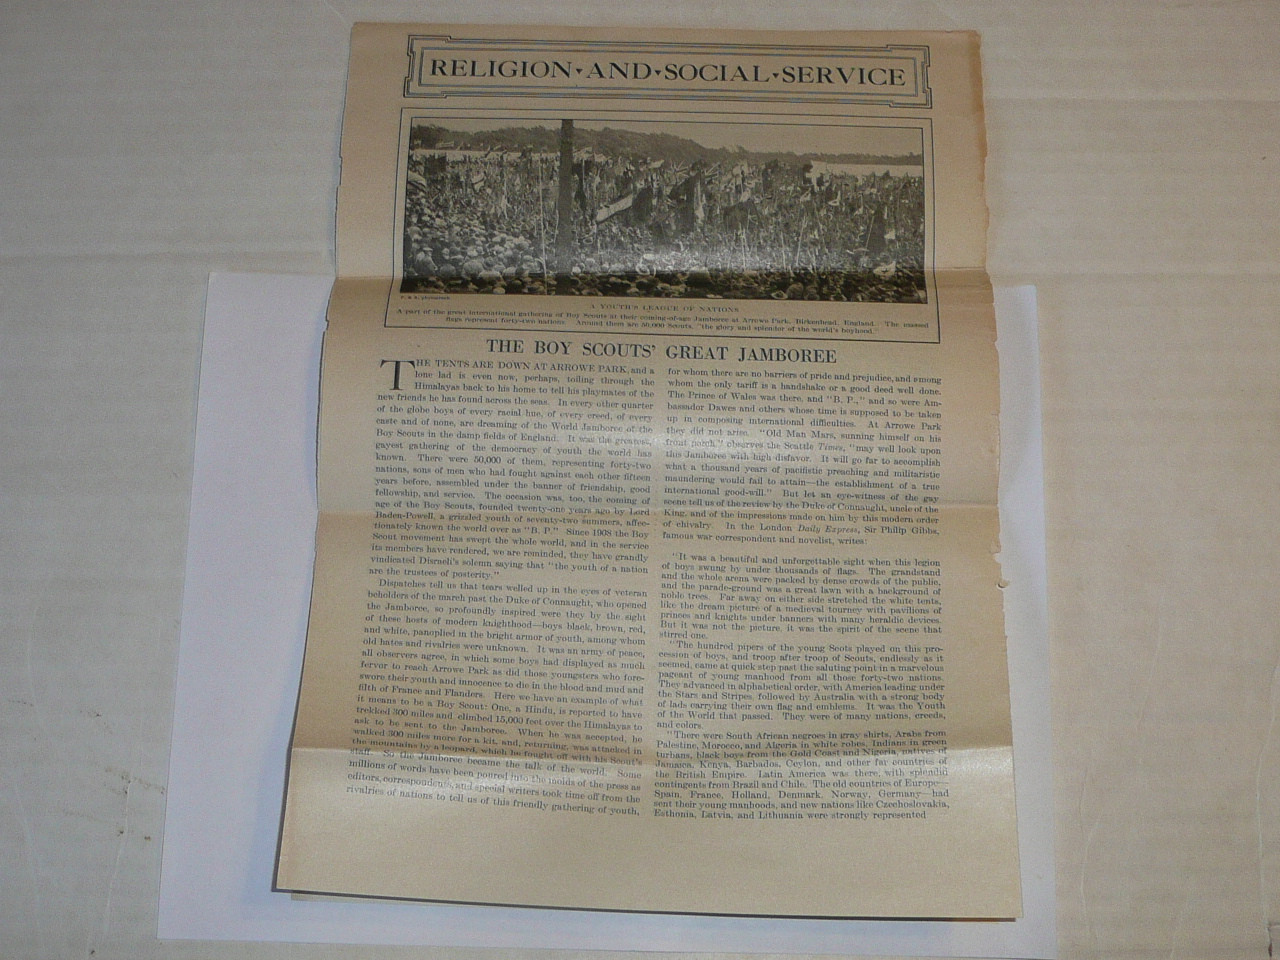 1929 World Jamboree, Article from "The Literary Digest" dated Aug 31, 1929 about the Great Jamboree